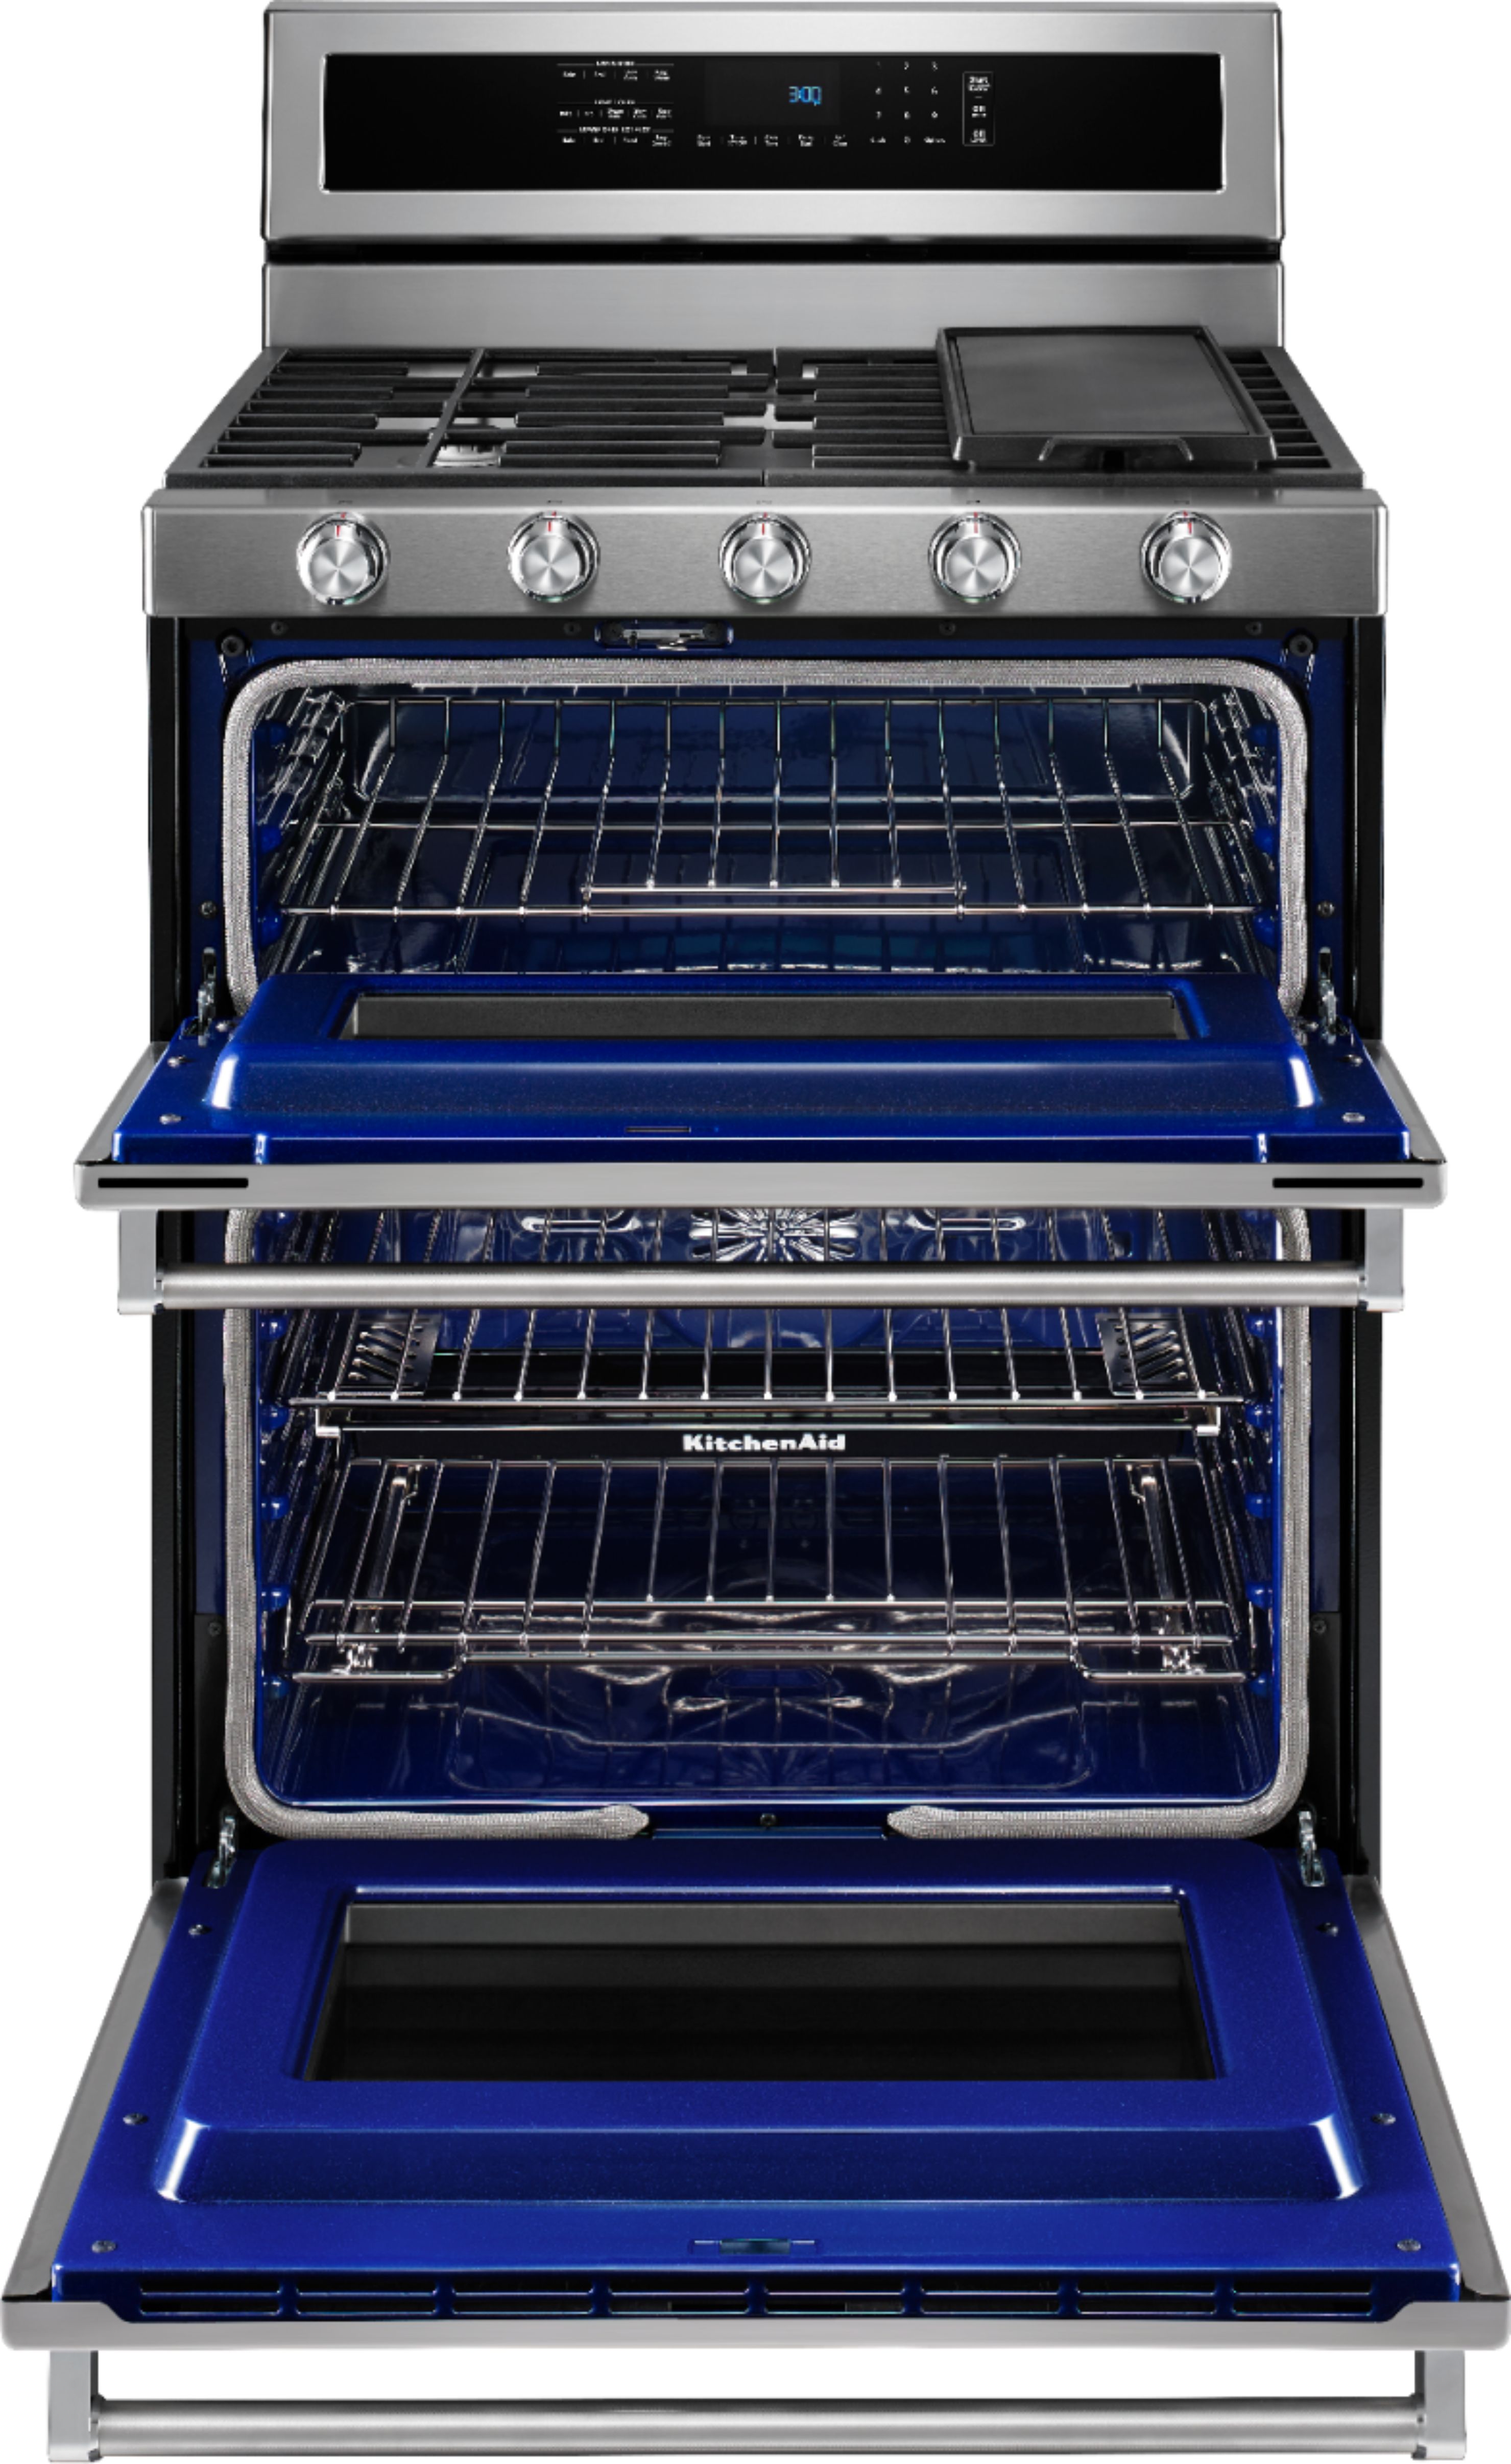 Angle View: KitchenAid - 6.7 Cu. Ft. Self-Cleaning Freestanding Double Oven Dual Fuel Convection Range - Stainless steel